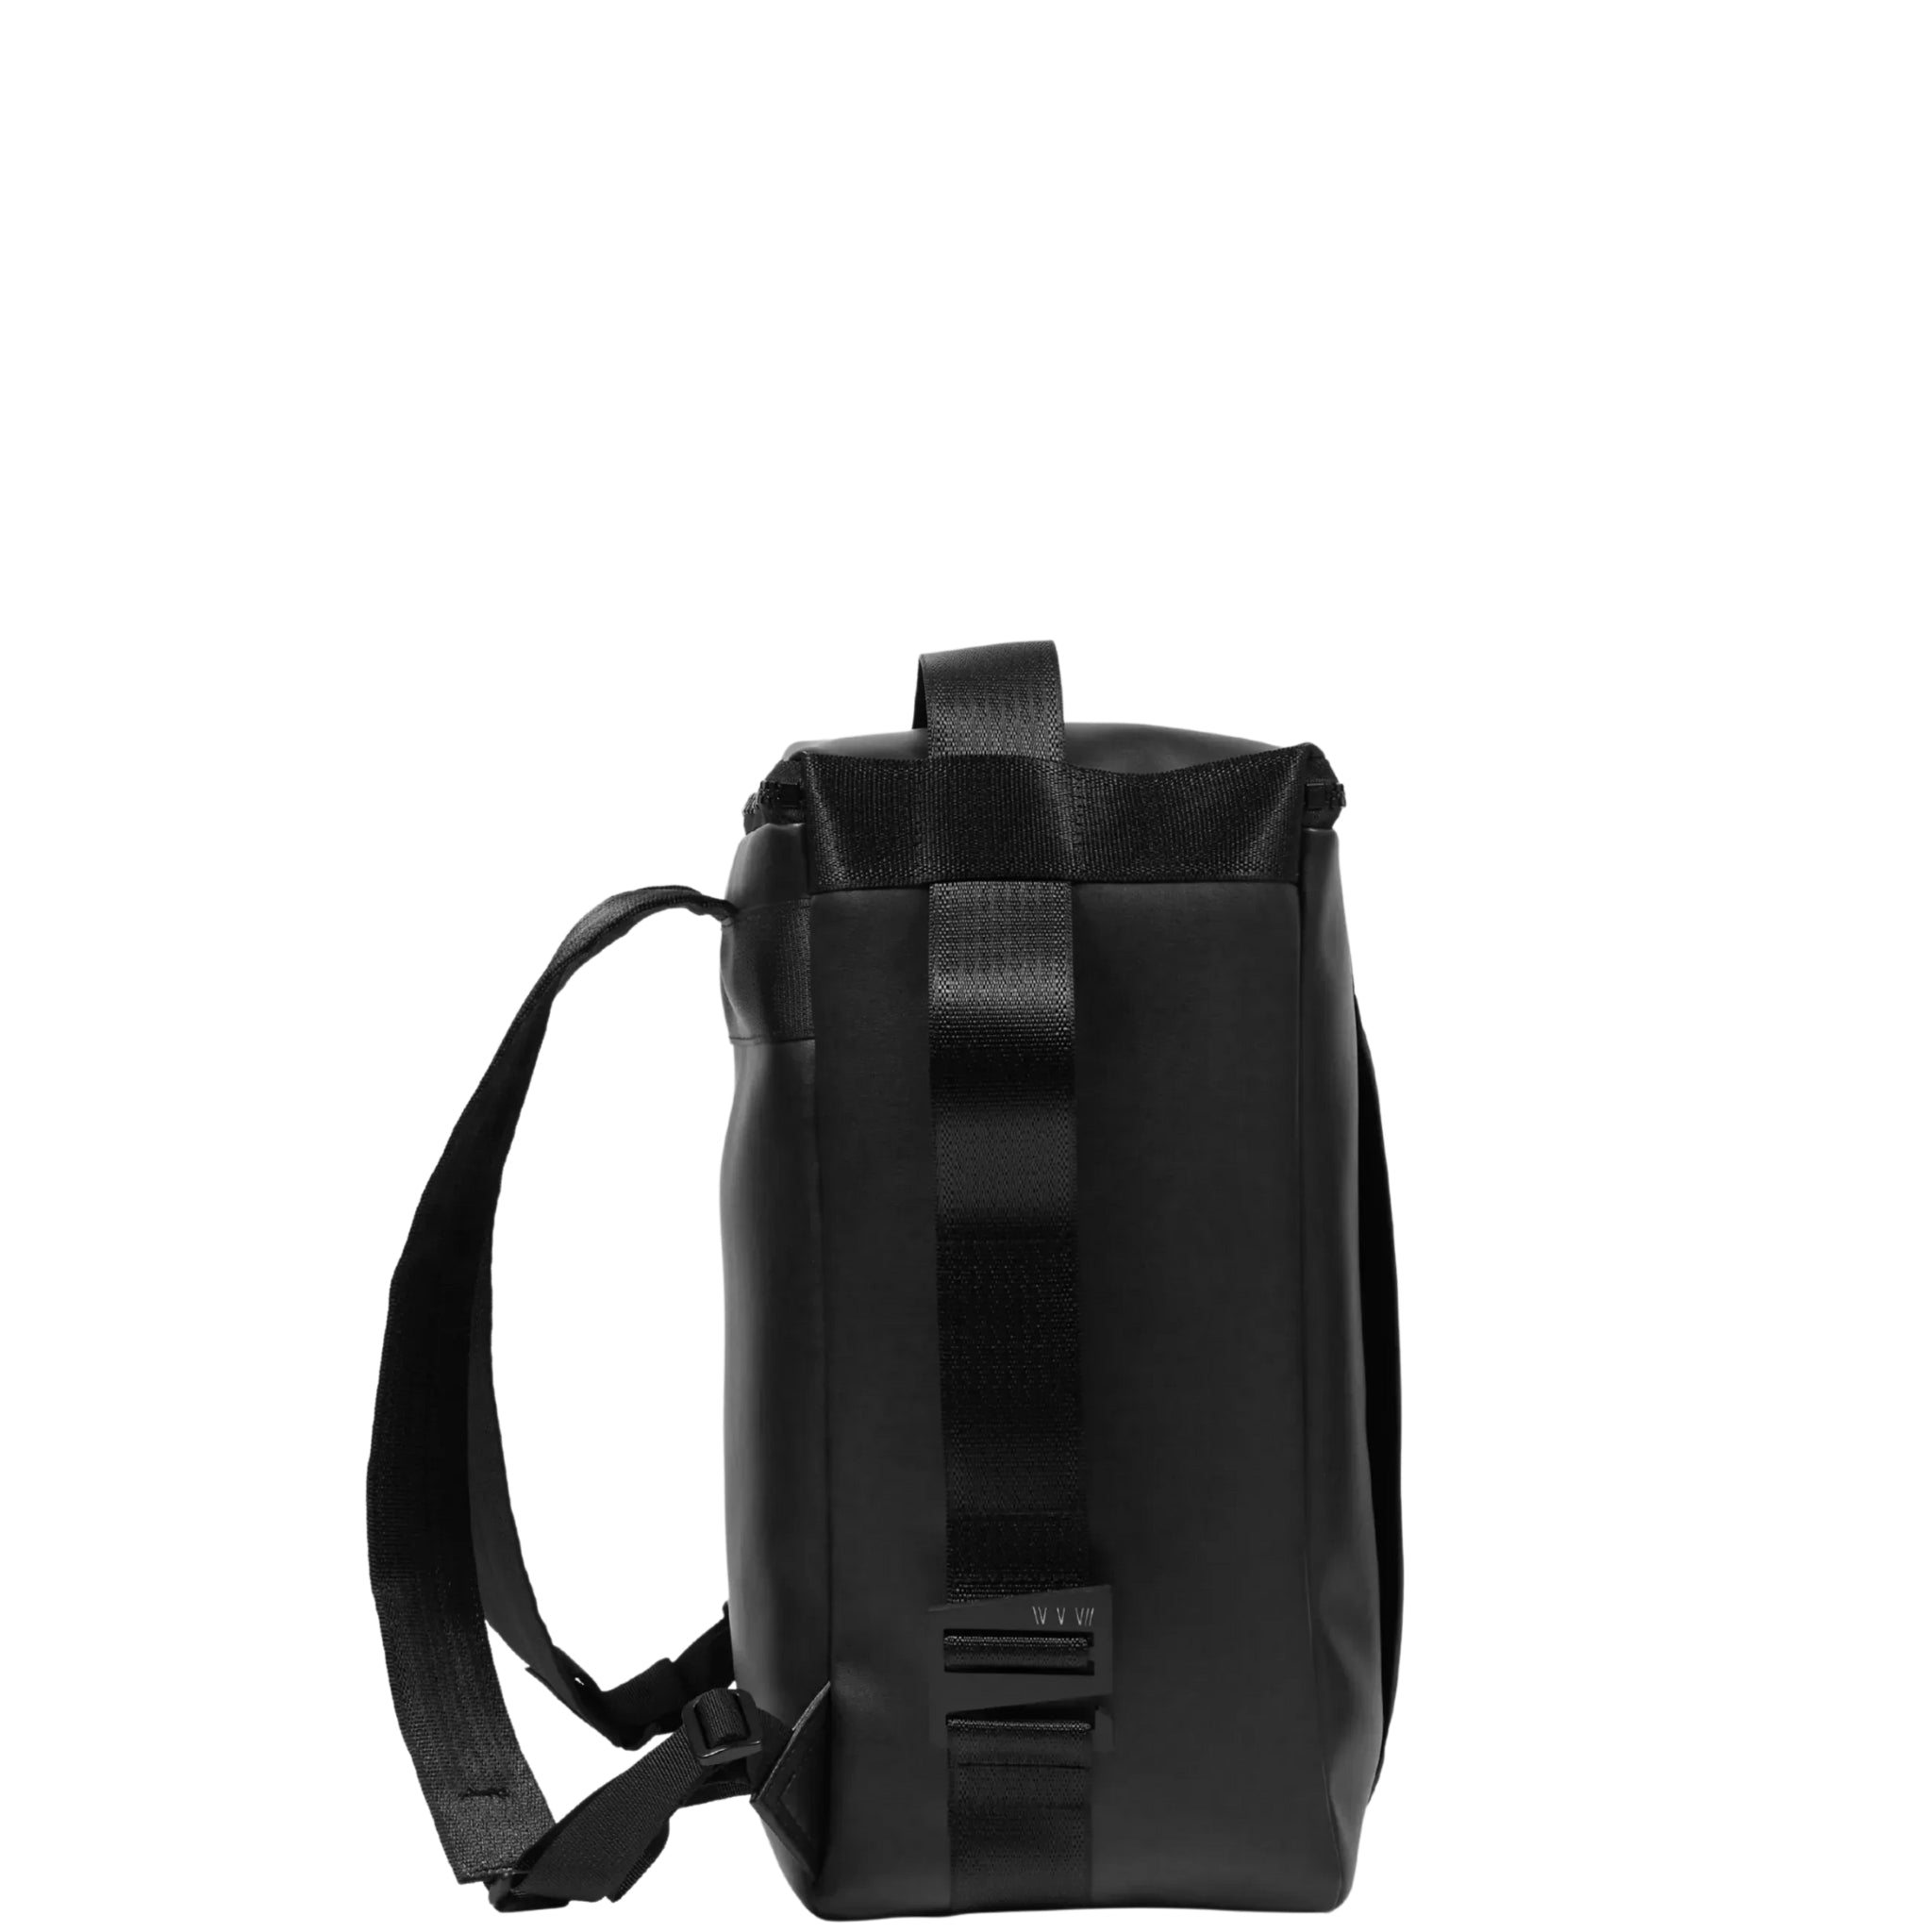 the side of an Interesting rectangular shaped backpack in black vegan leather material (Desserto) on a white background.